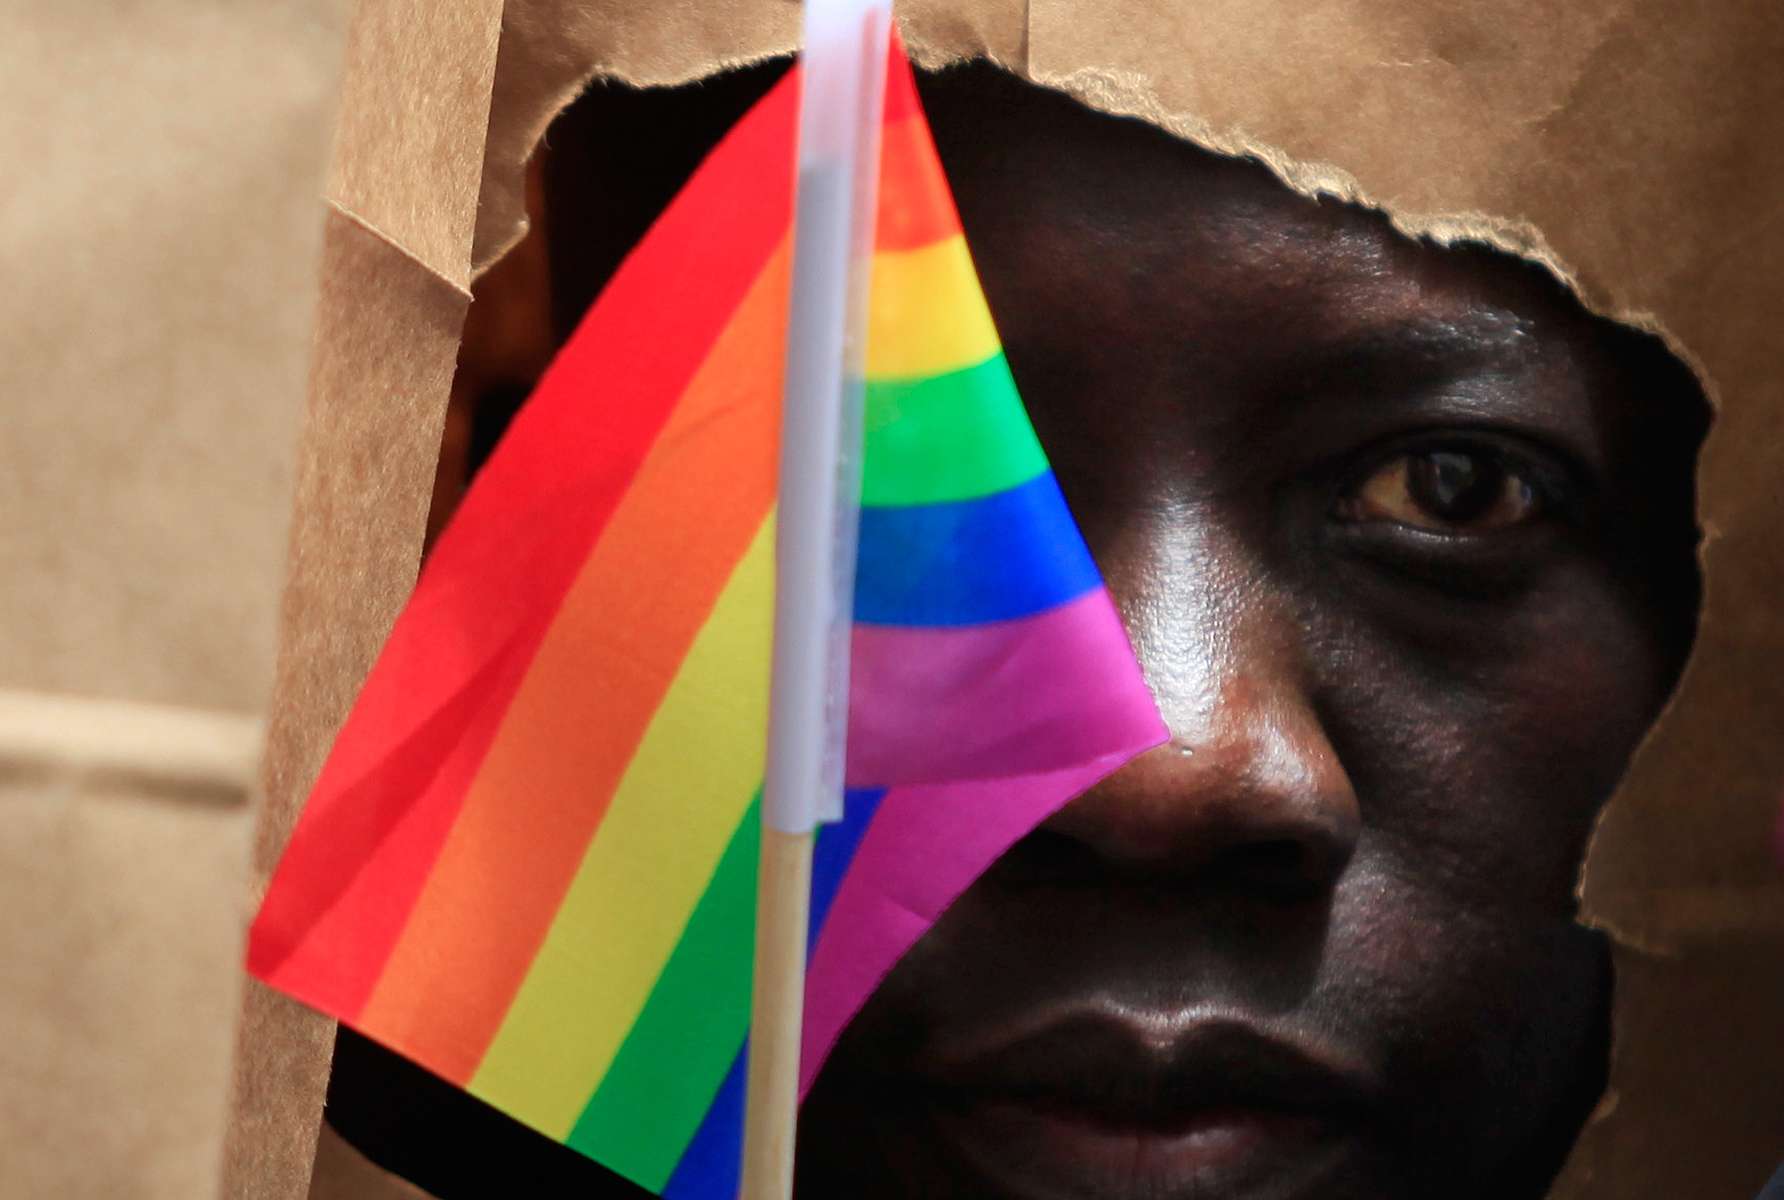 An asylum seeker from Uganda covers his face with a paper bag in order to protect his identity as he marches with the LGBT Asylum Support Task Force during the Gay Pride Parade in Boston, Massachusetts June 8, 2013. Homosexuality in Uganda is illegal and carries a potential penalty of life in prison.